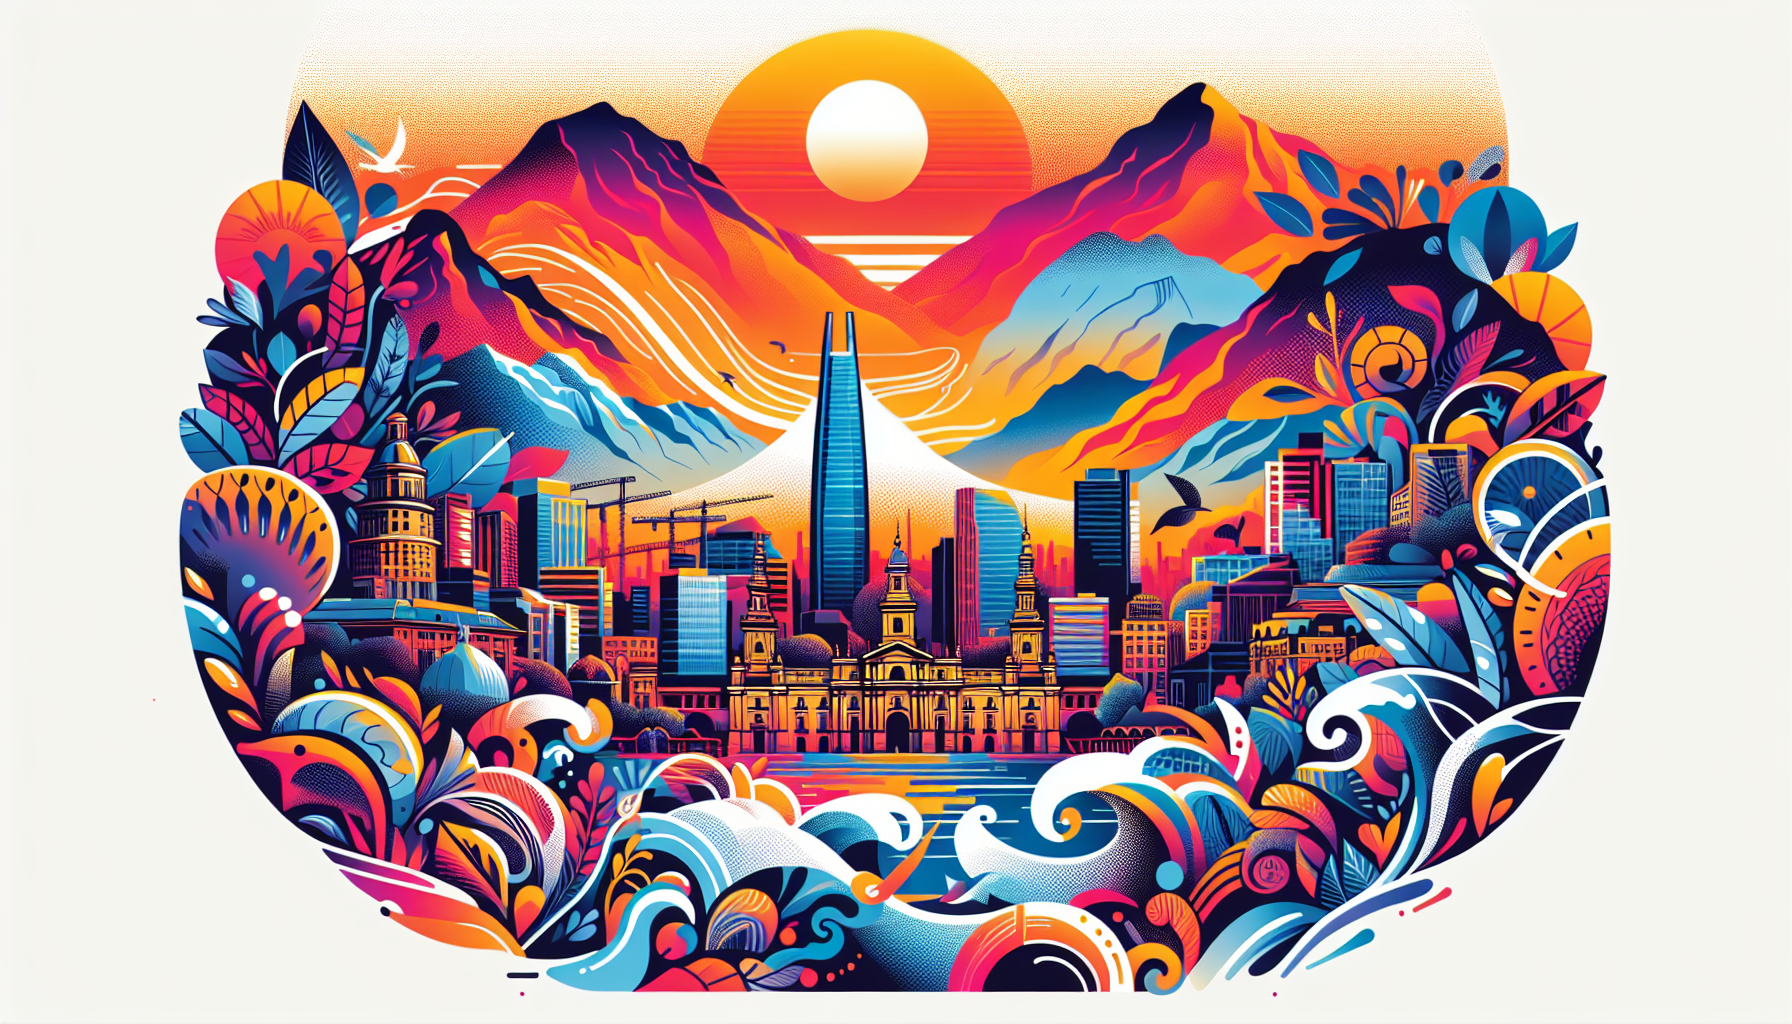 A serene illustration of the city of Santiago, Chile with a focus on cultural landmarks, bustling street scenes, and the backdrop of the Andes mountains during sunset.